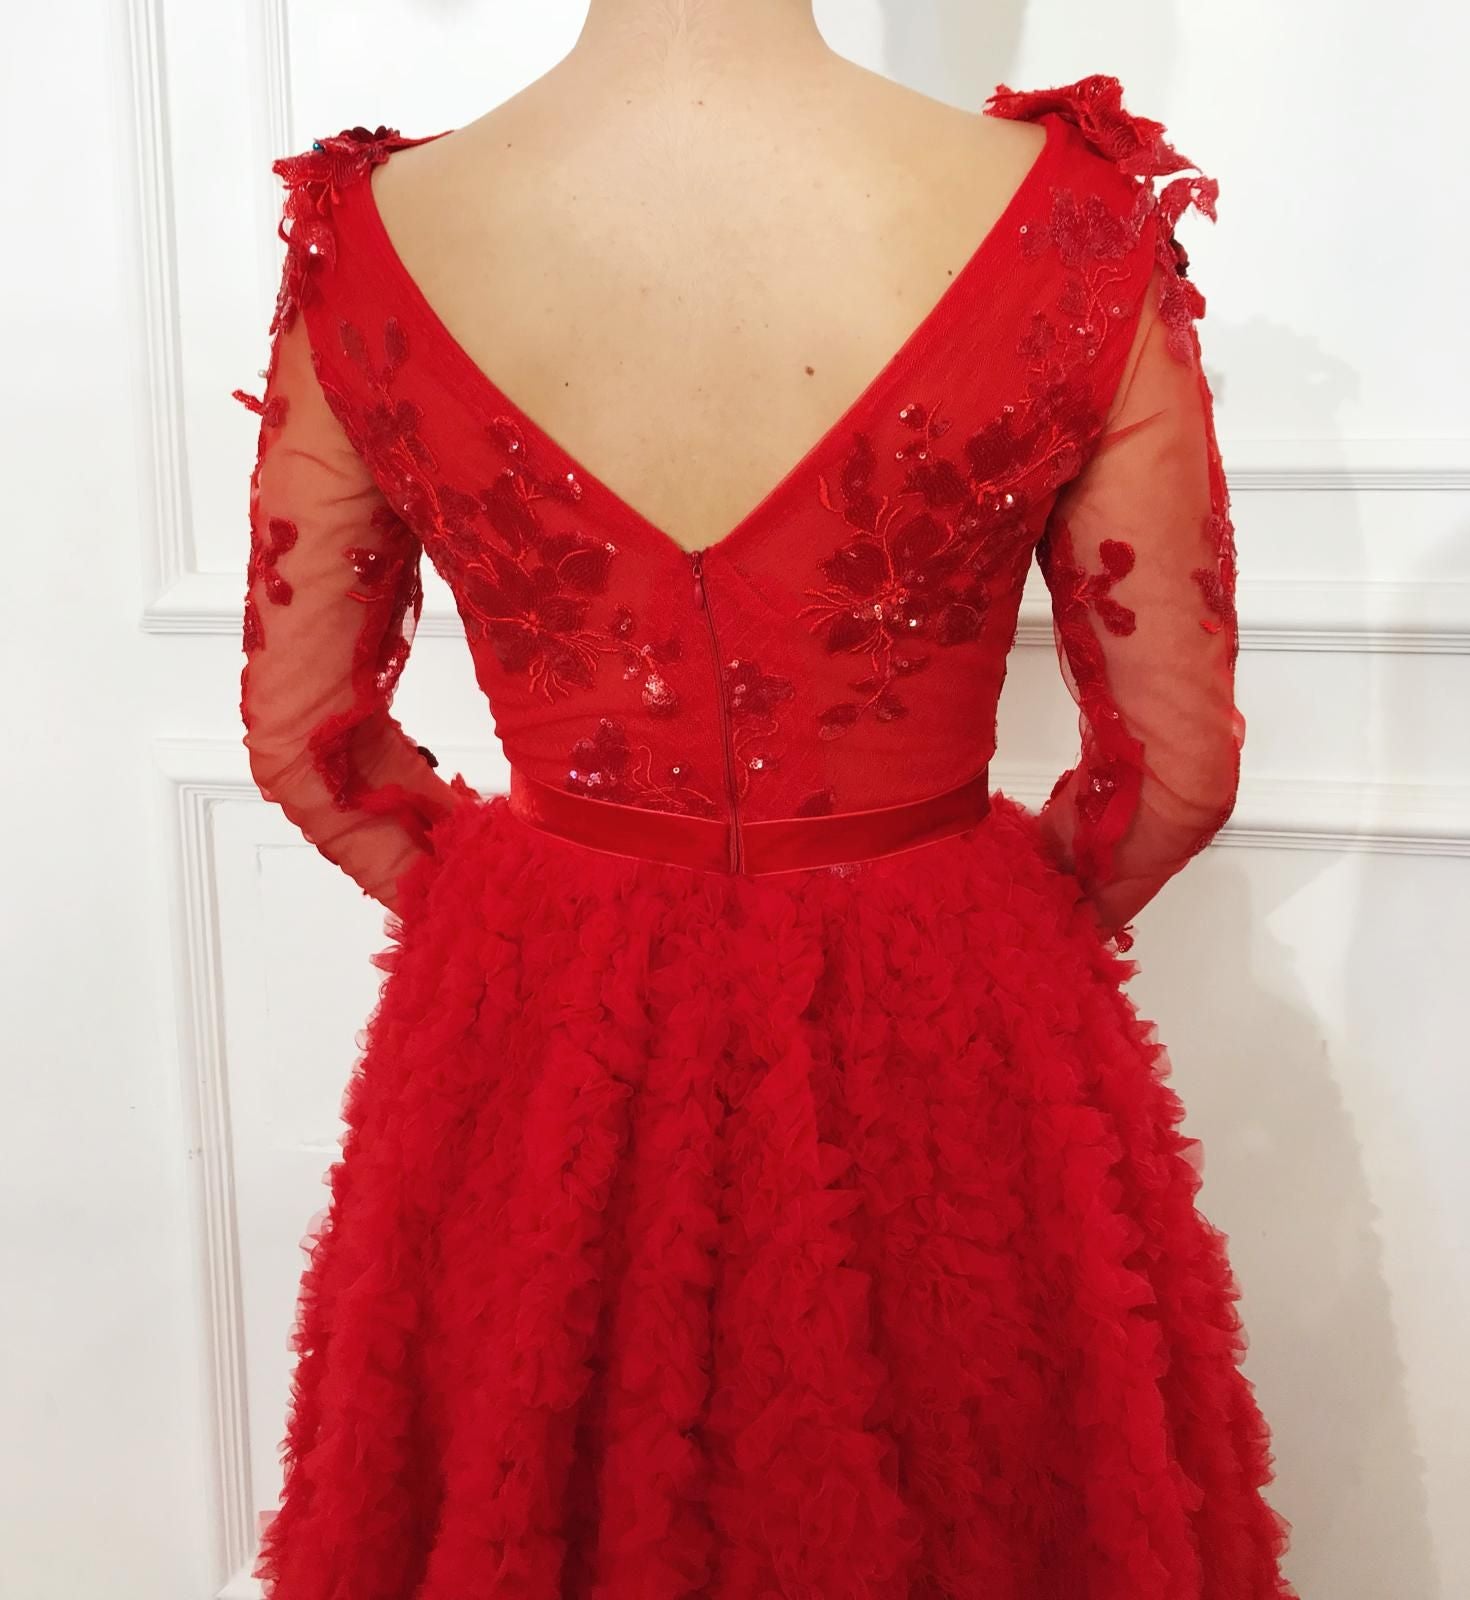 Red A-Line dress with long sleeves, v-neck and embroidery